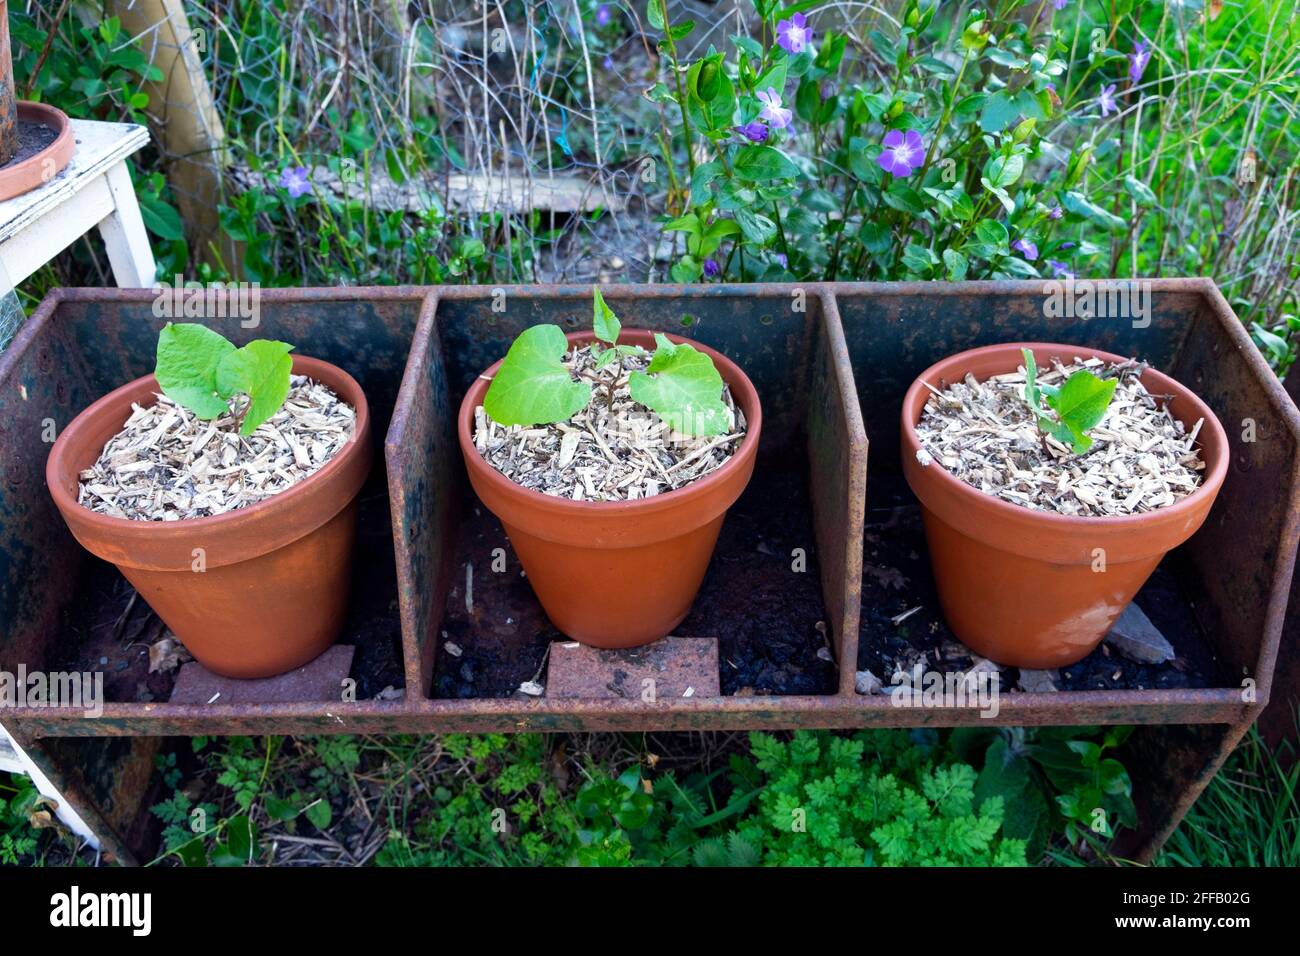 Hestia dwarf runner bean plant plants planted in terracotta pot pots with chipped bark mulch to prevent loss of moisture water in dry spring Wales UK Stock Photo